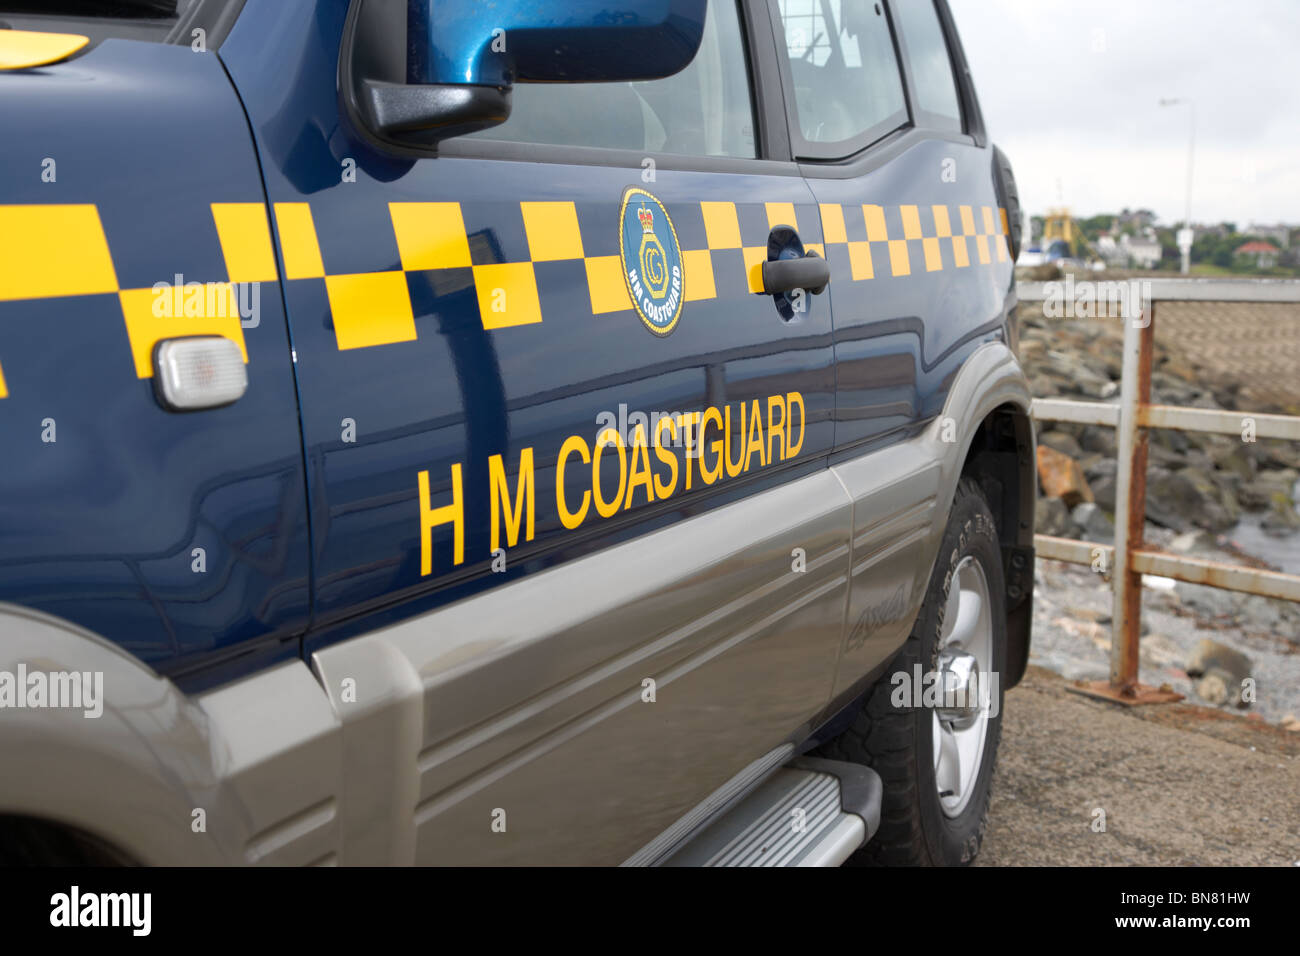 HM Coastguard search and rescue 4x4 vehicle parked on a pier in the uk Stock Photo